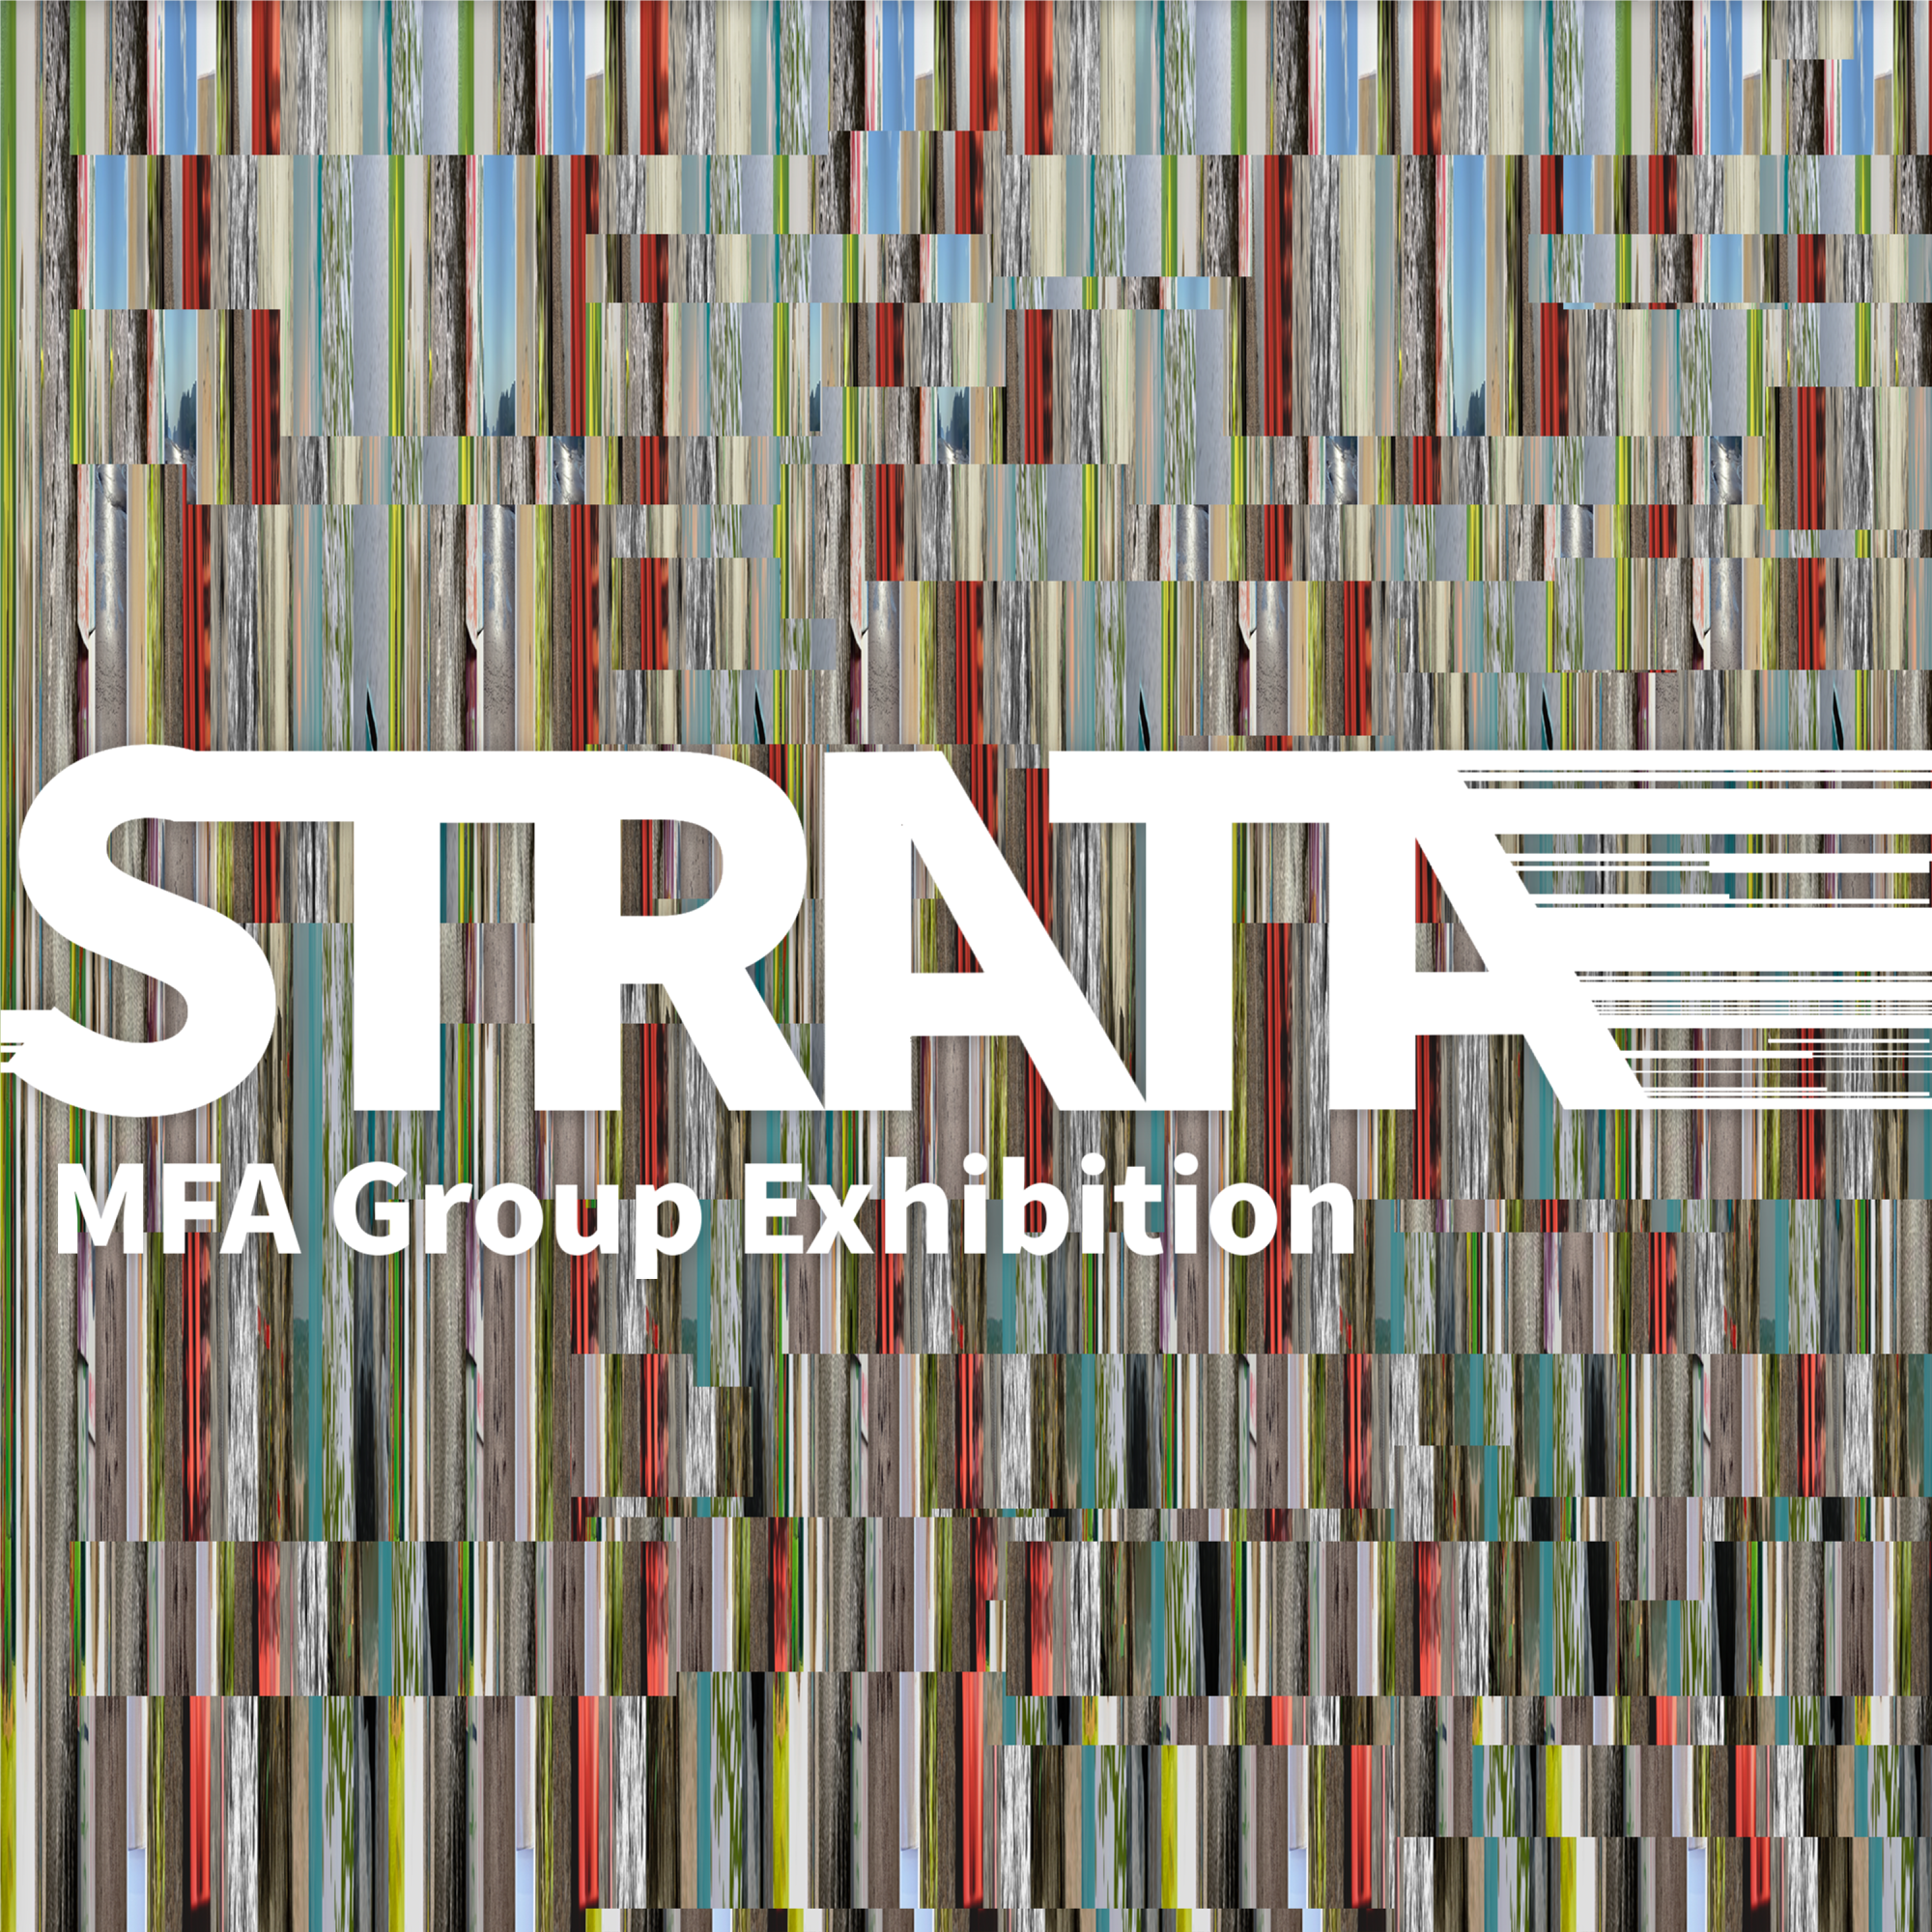 MFA group show STRATA text on glitched image background